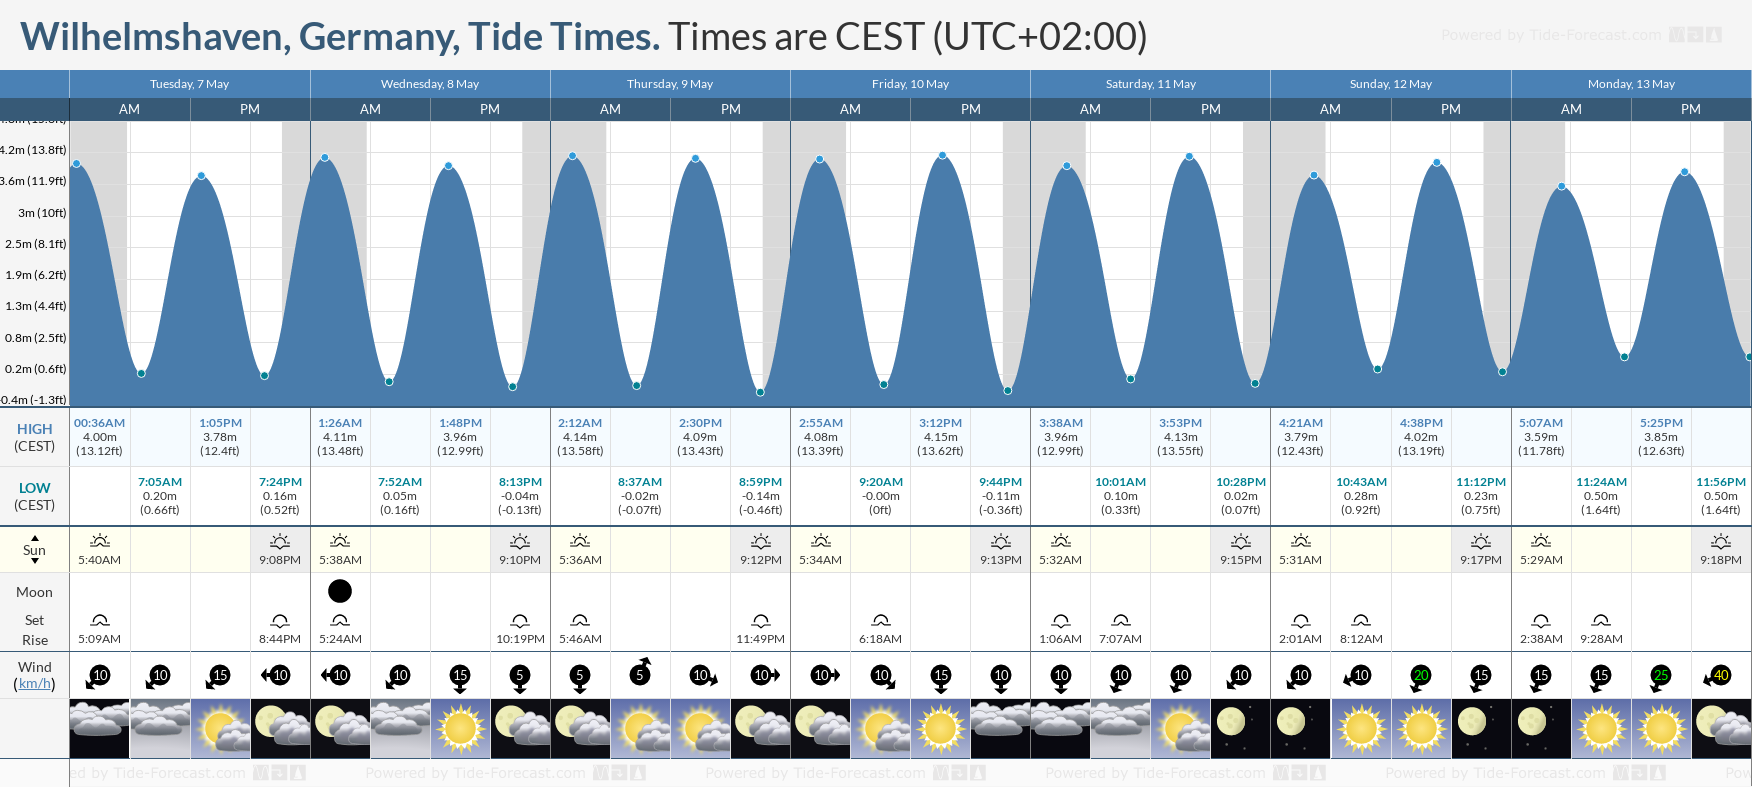 Wilhelmshaven, Germany Tide Chart including high and low tide times for the next 7 days